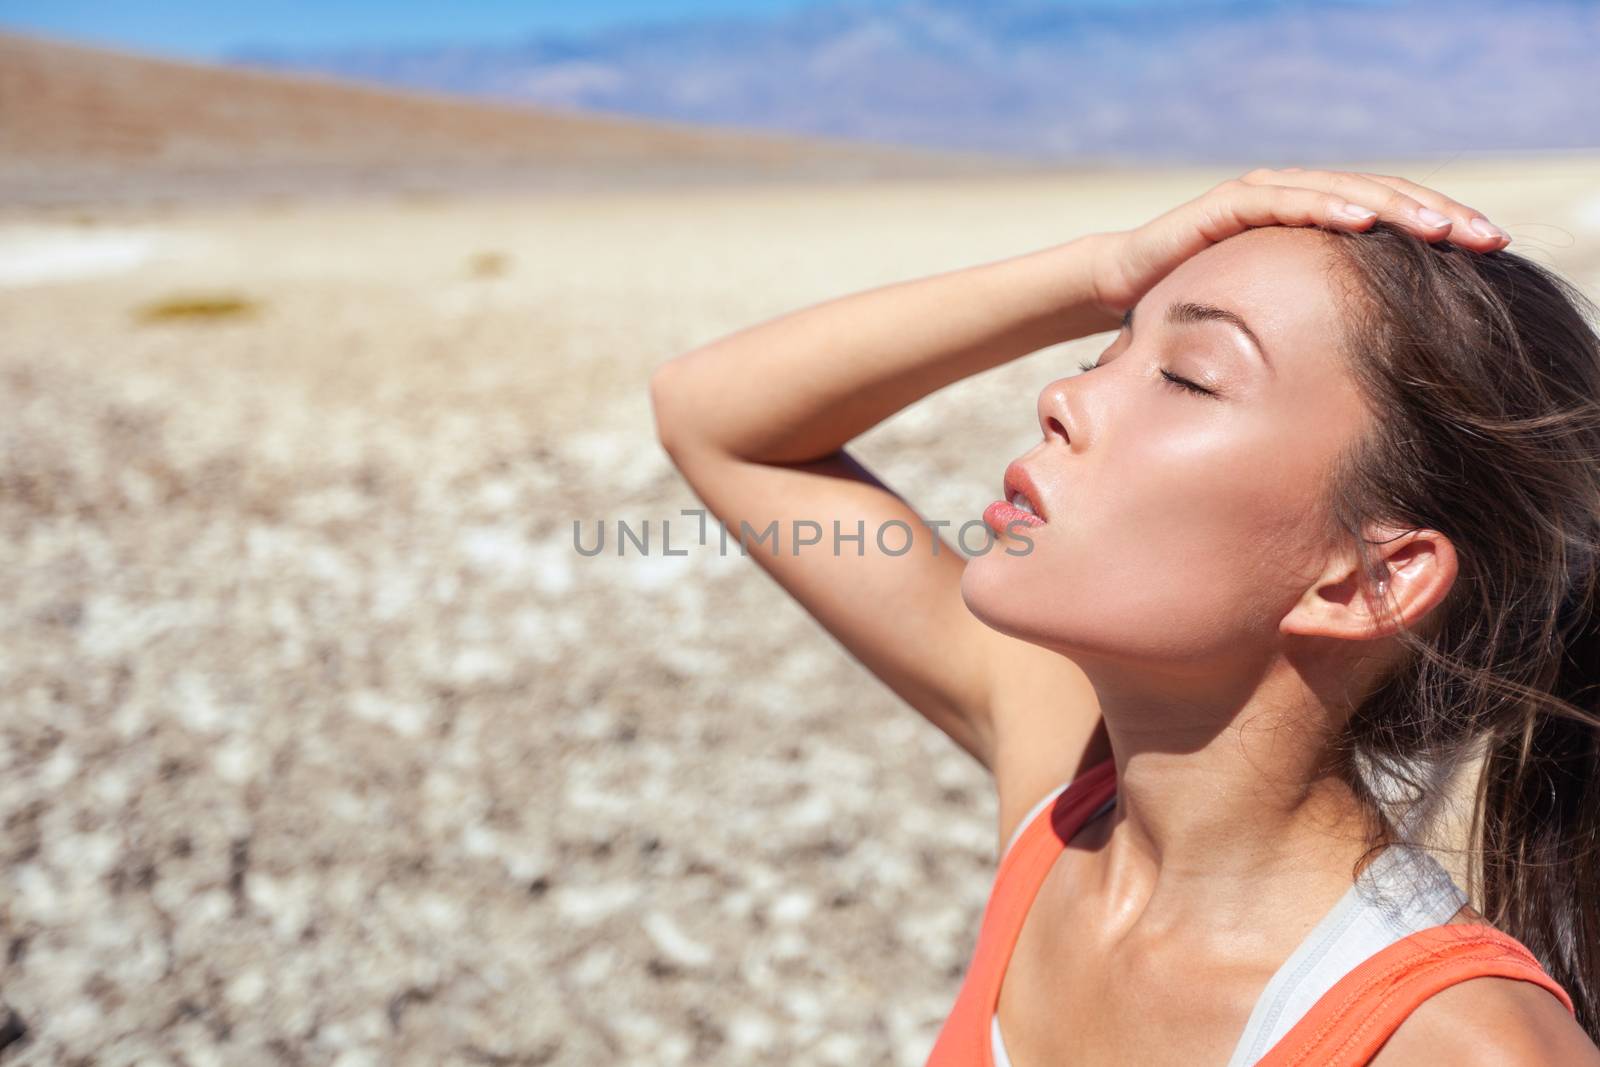 Heat stroke tired dehydrated girl under the desert sun hot temperature summer weather danger. Asian woman sweating exhausted.